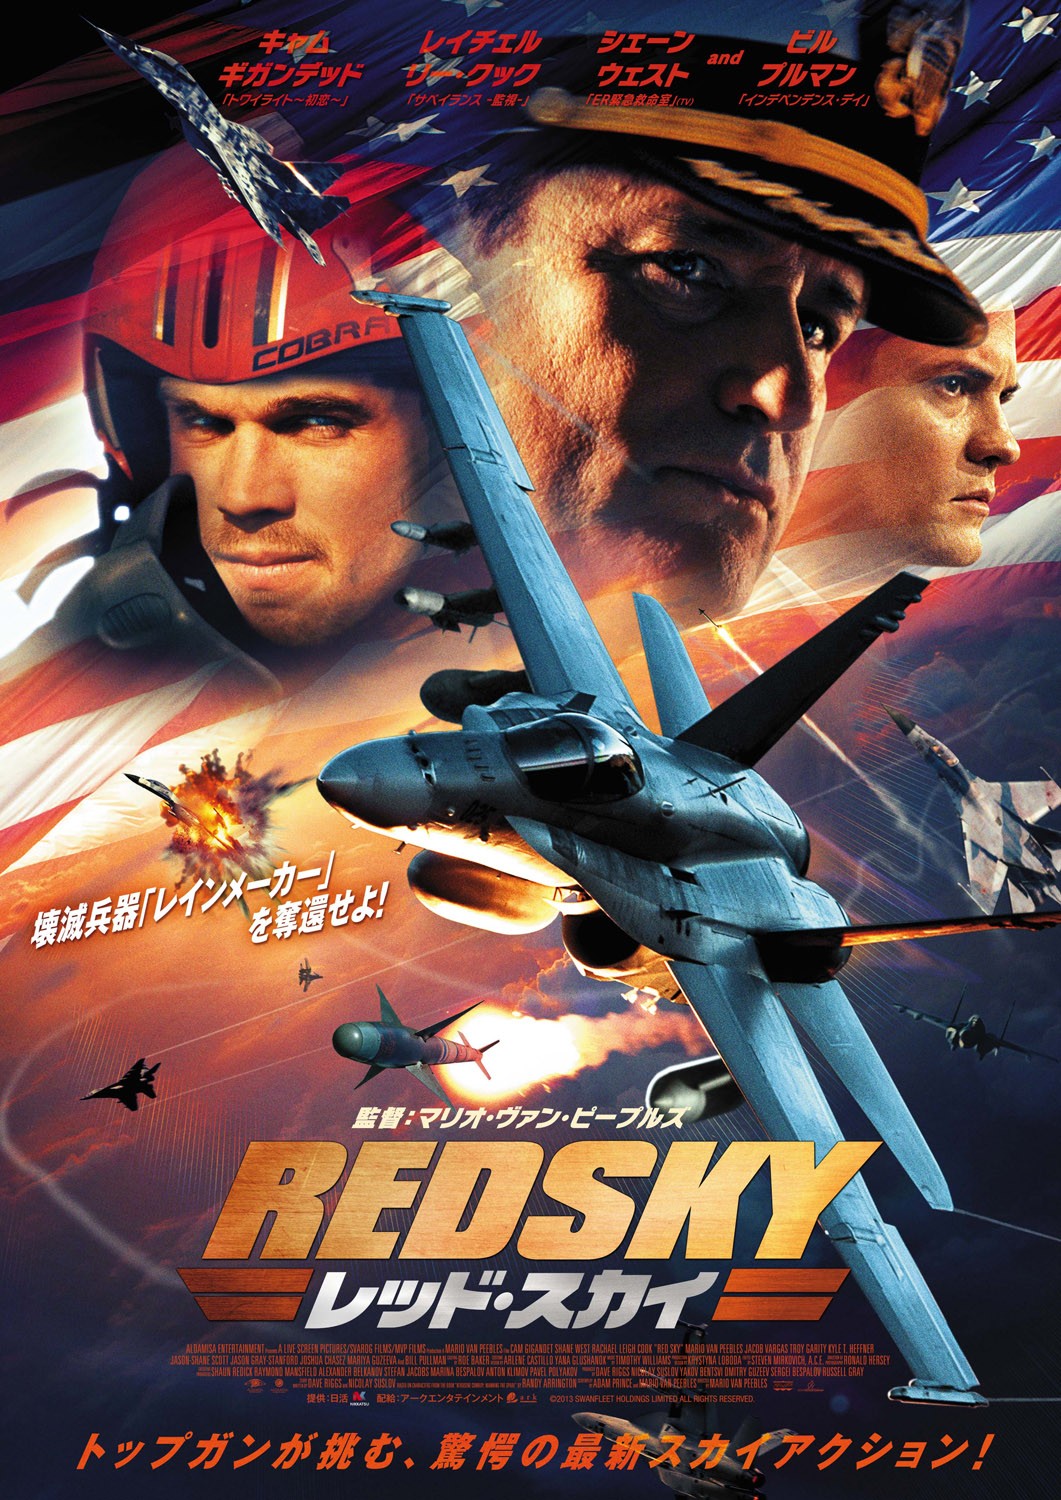 Extra Large Movie Poster Image for Red Sky (#2 of 2)